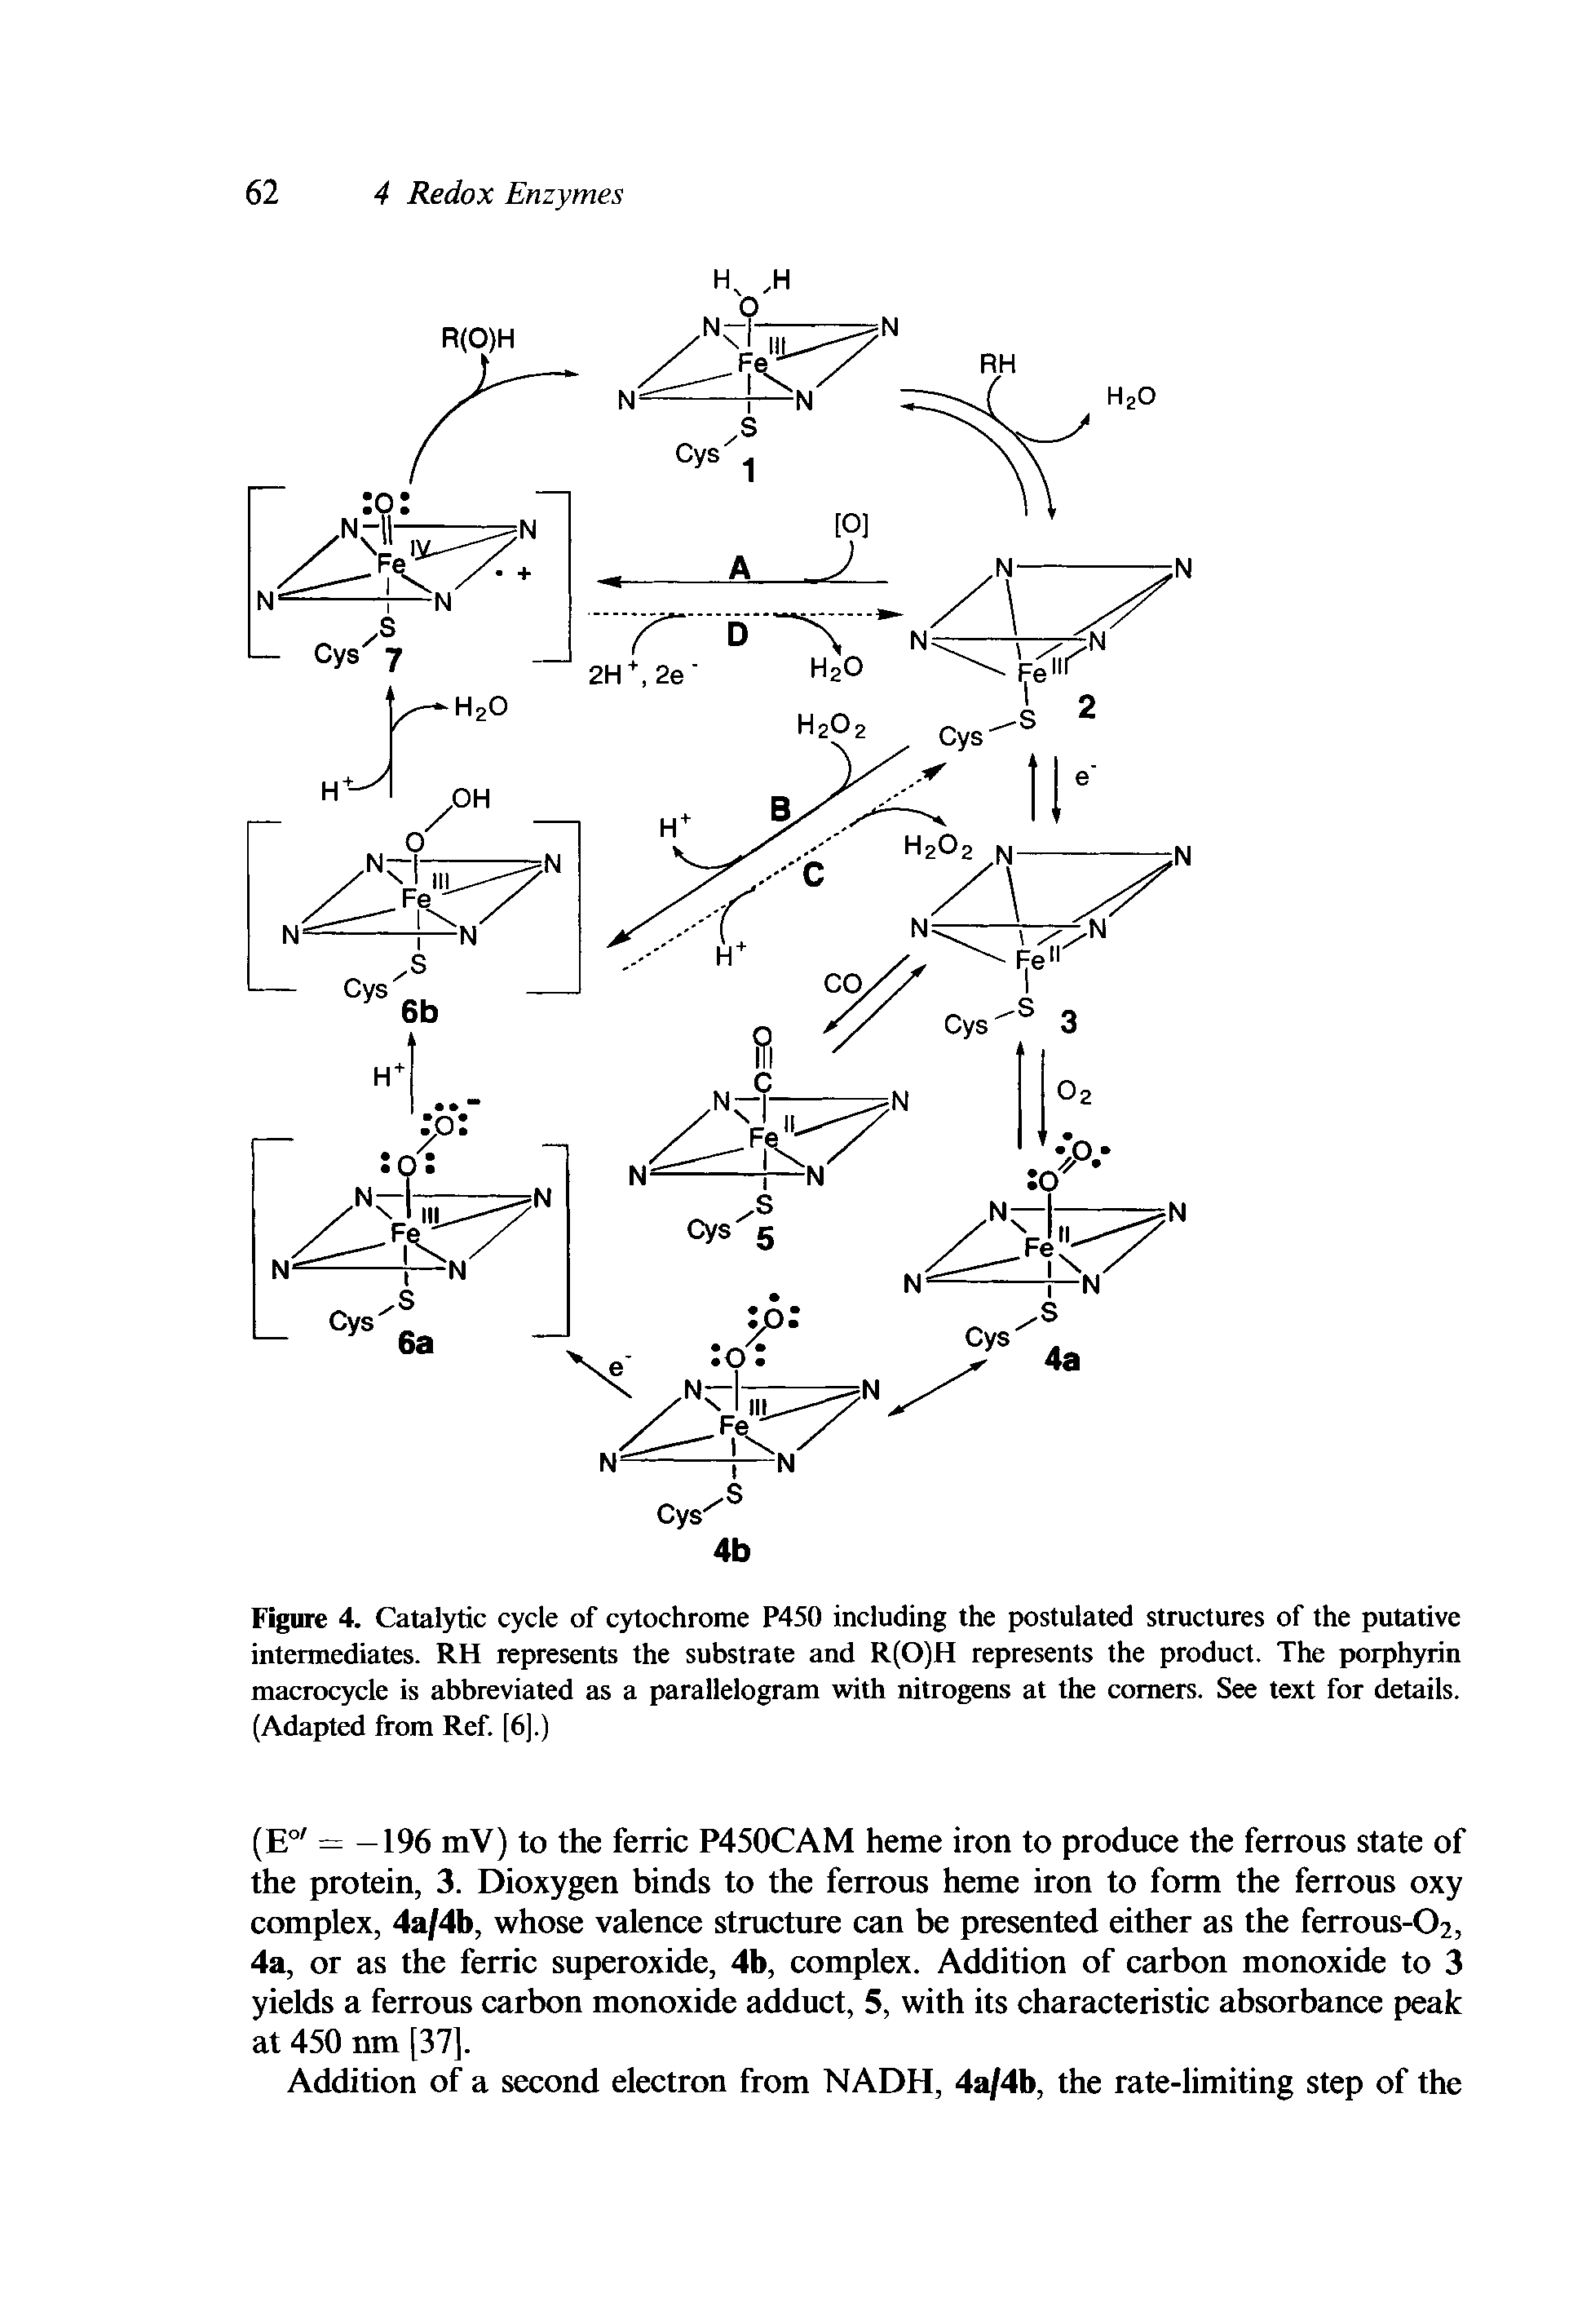 Figure 4. Catalytic cycle of cytochrome P450 including the postulated structures of the putative intermediates. RH represents the substrate and R(0)H represents the product. The porphyrin macrocycle is abbreviated as a parallelogram with nitrogens at the comers. See text for details. (Adapted from Ref. [6].)...